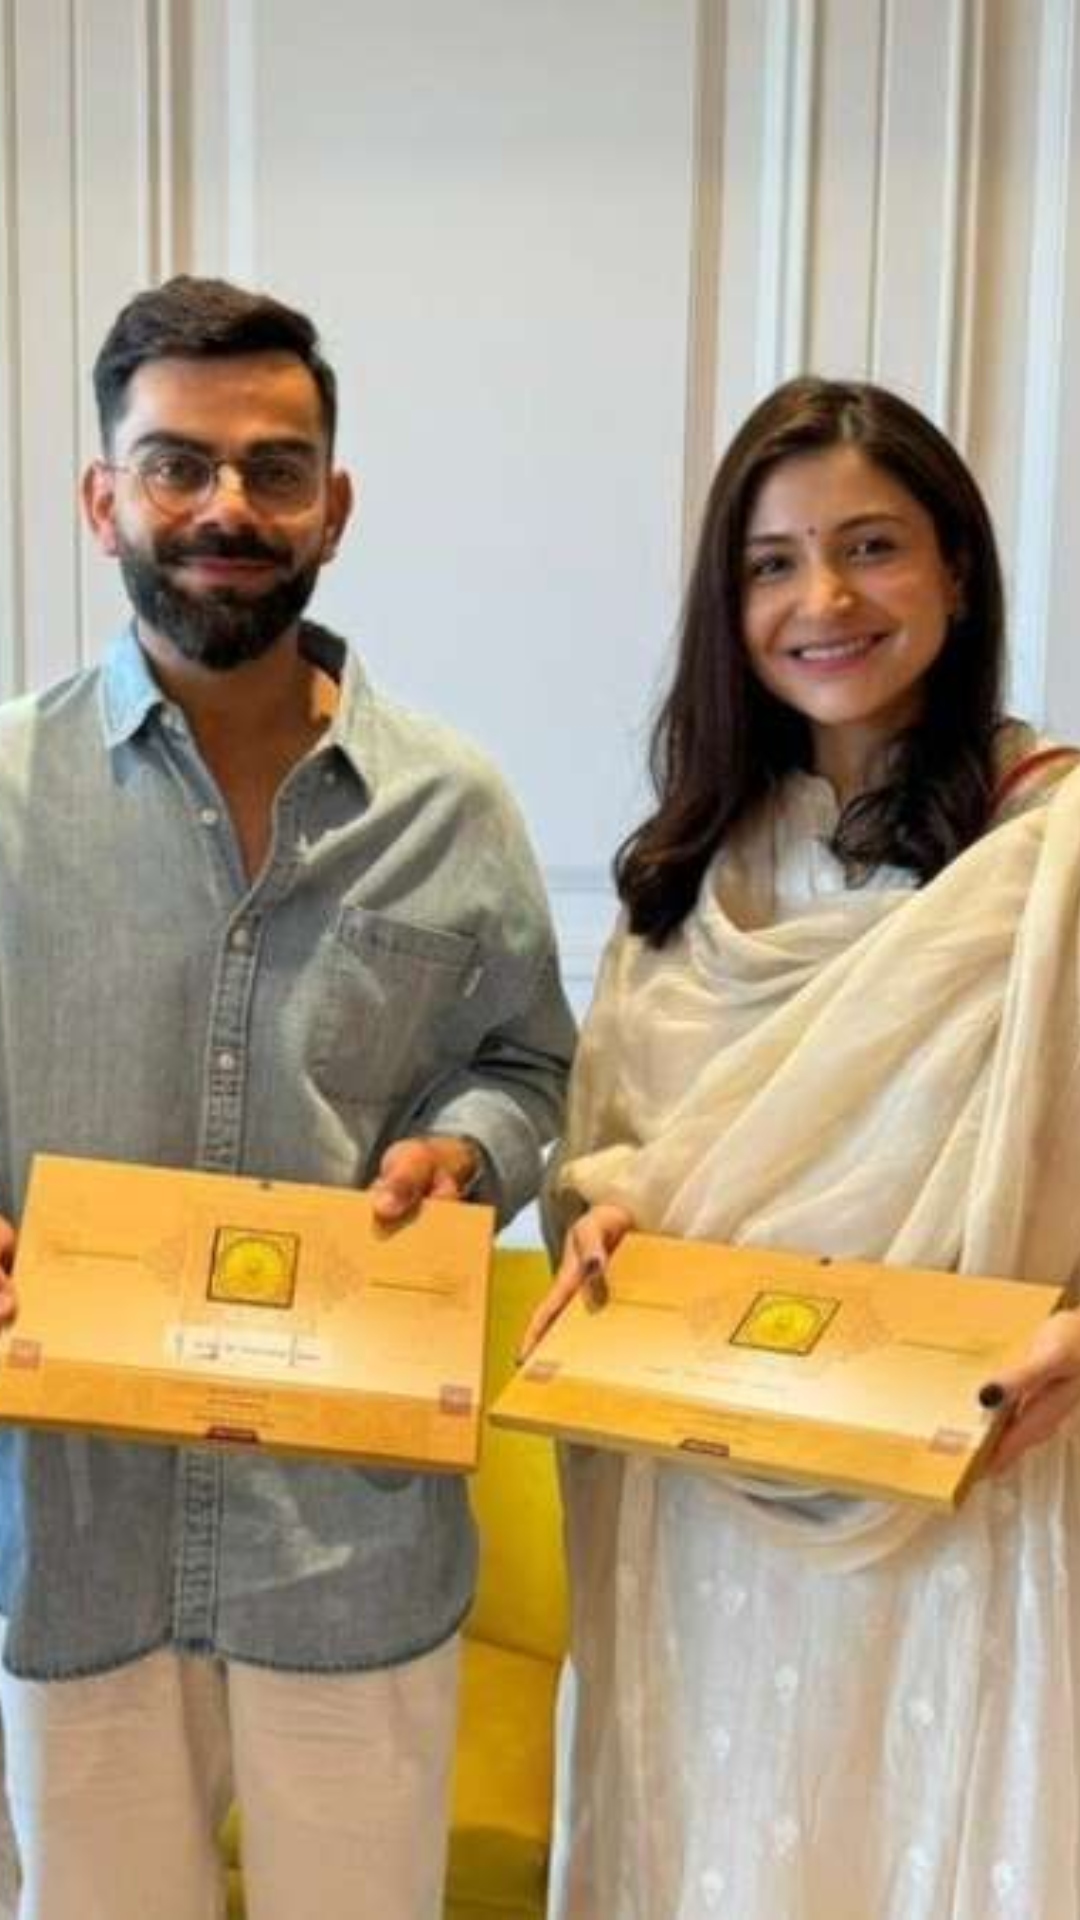 Did you know Anushka Sharma has a SPECIAL connection with Ayodhya? Find out here